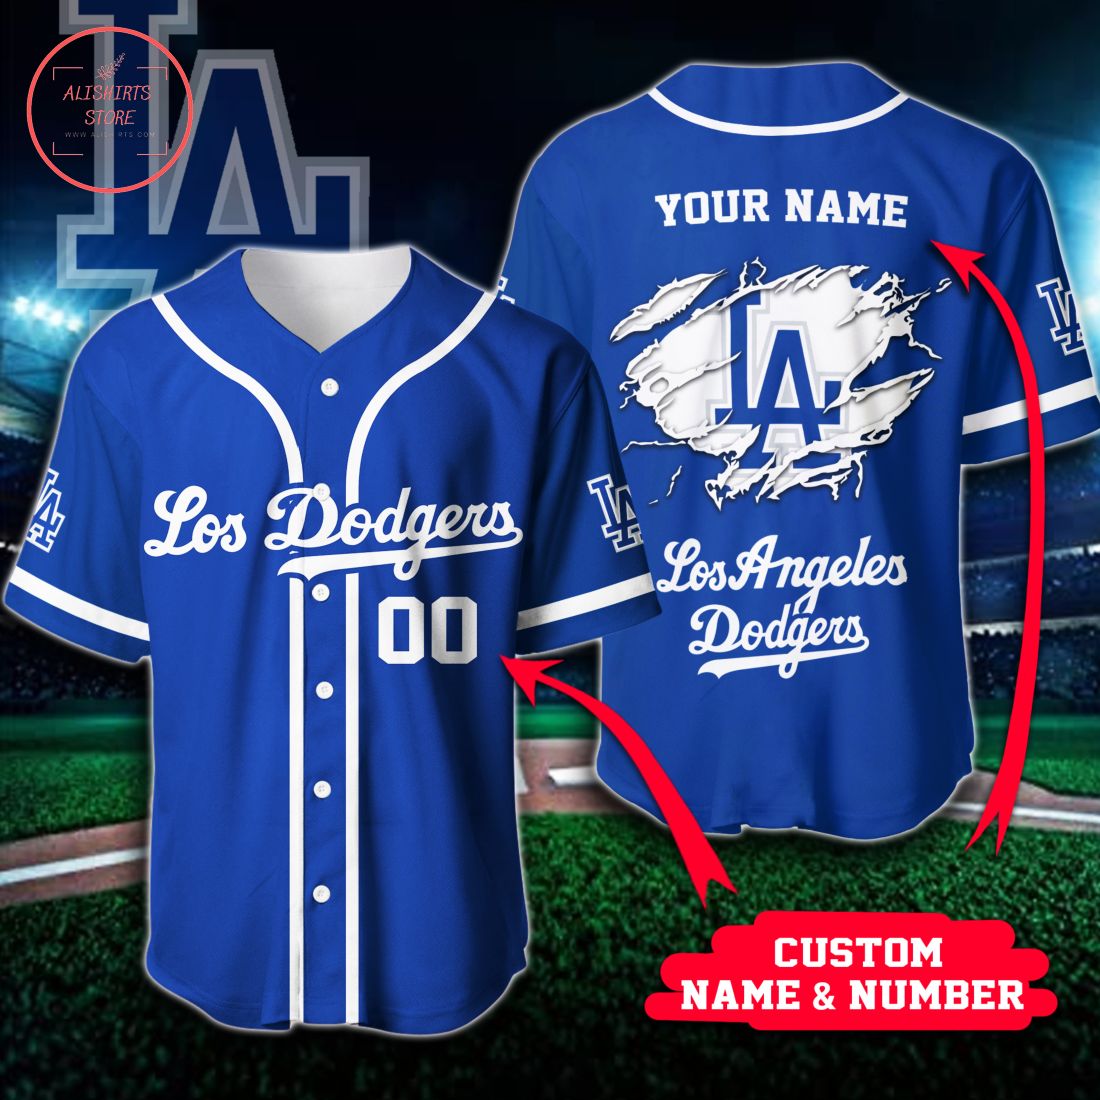 MLB Los Angeles Dodgers Personalized Baseball Jersey